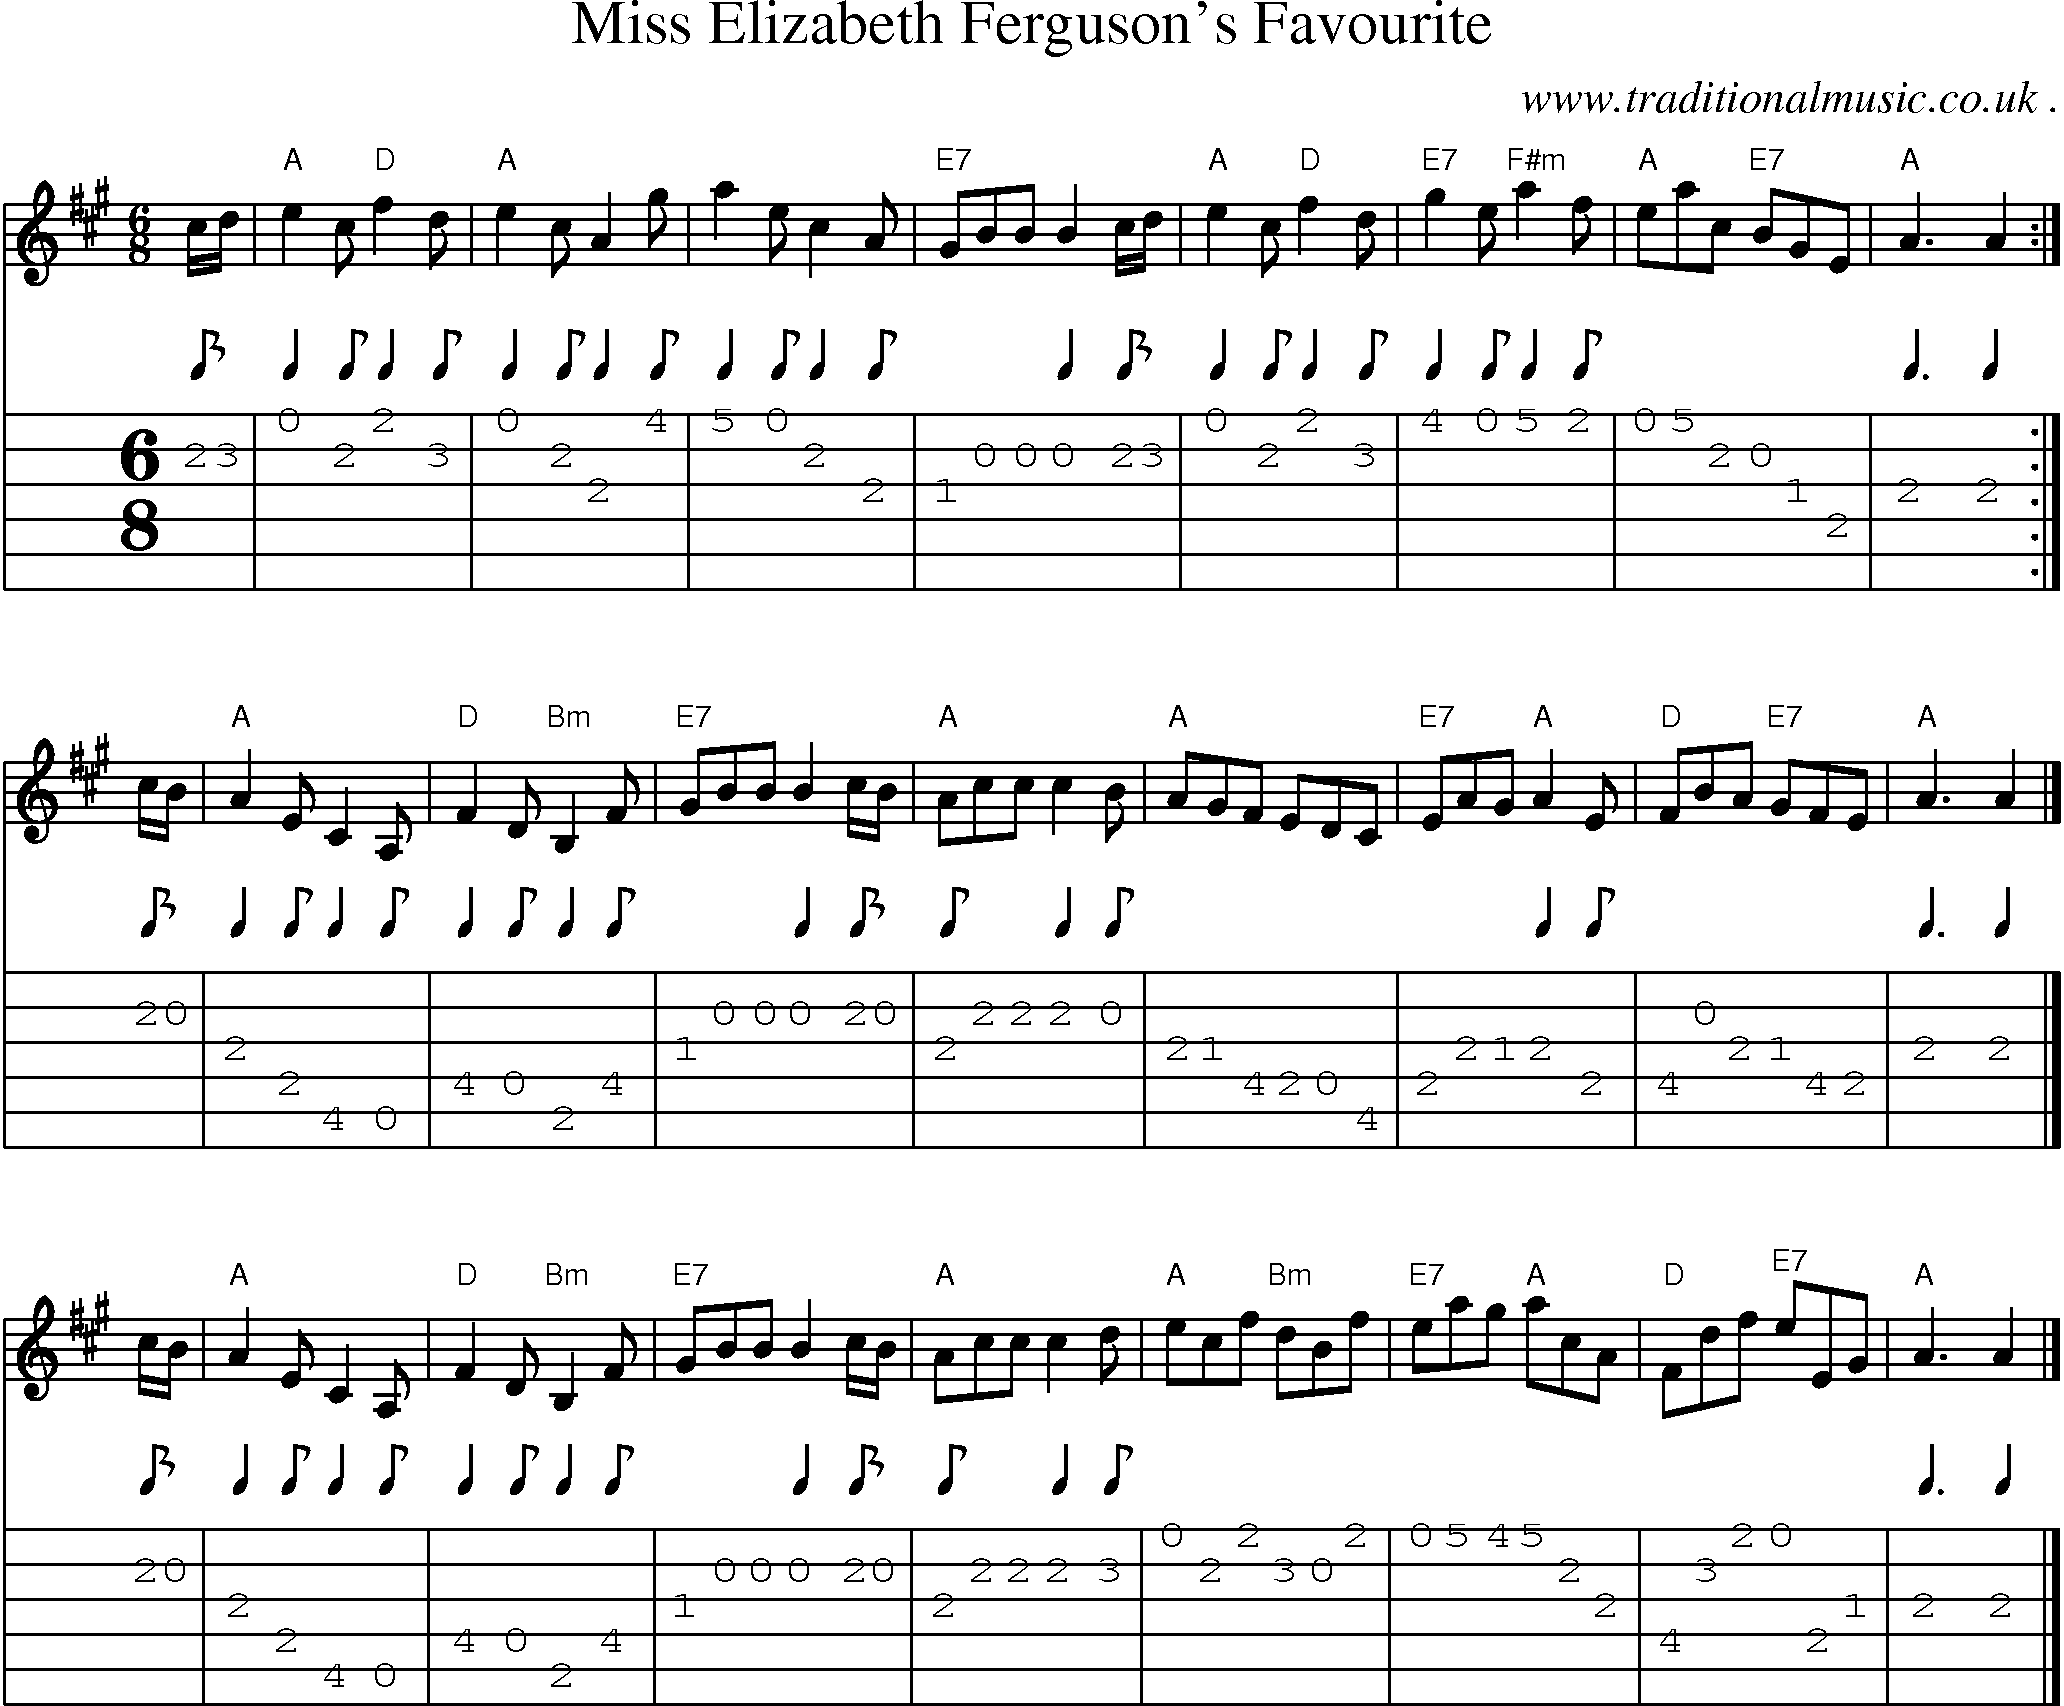 Sheet-music  score, Chords and Guitar Tabs for Miss Elizabeth Fergusons Favourite